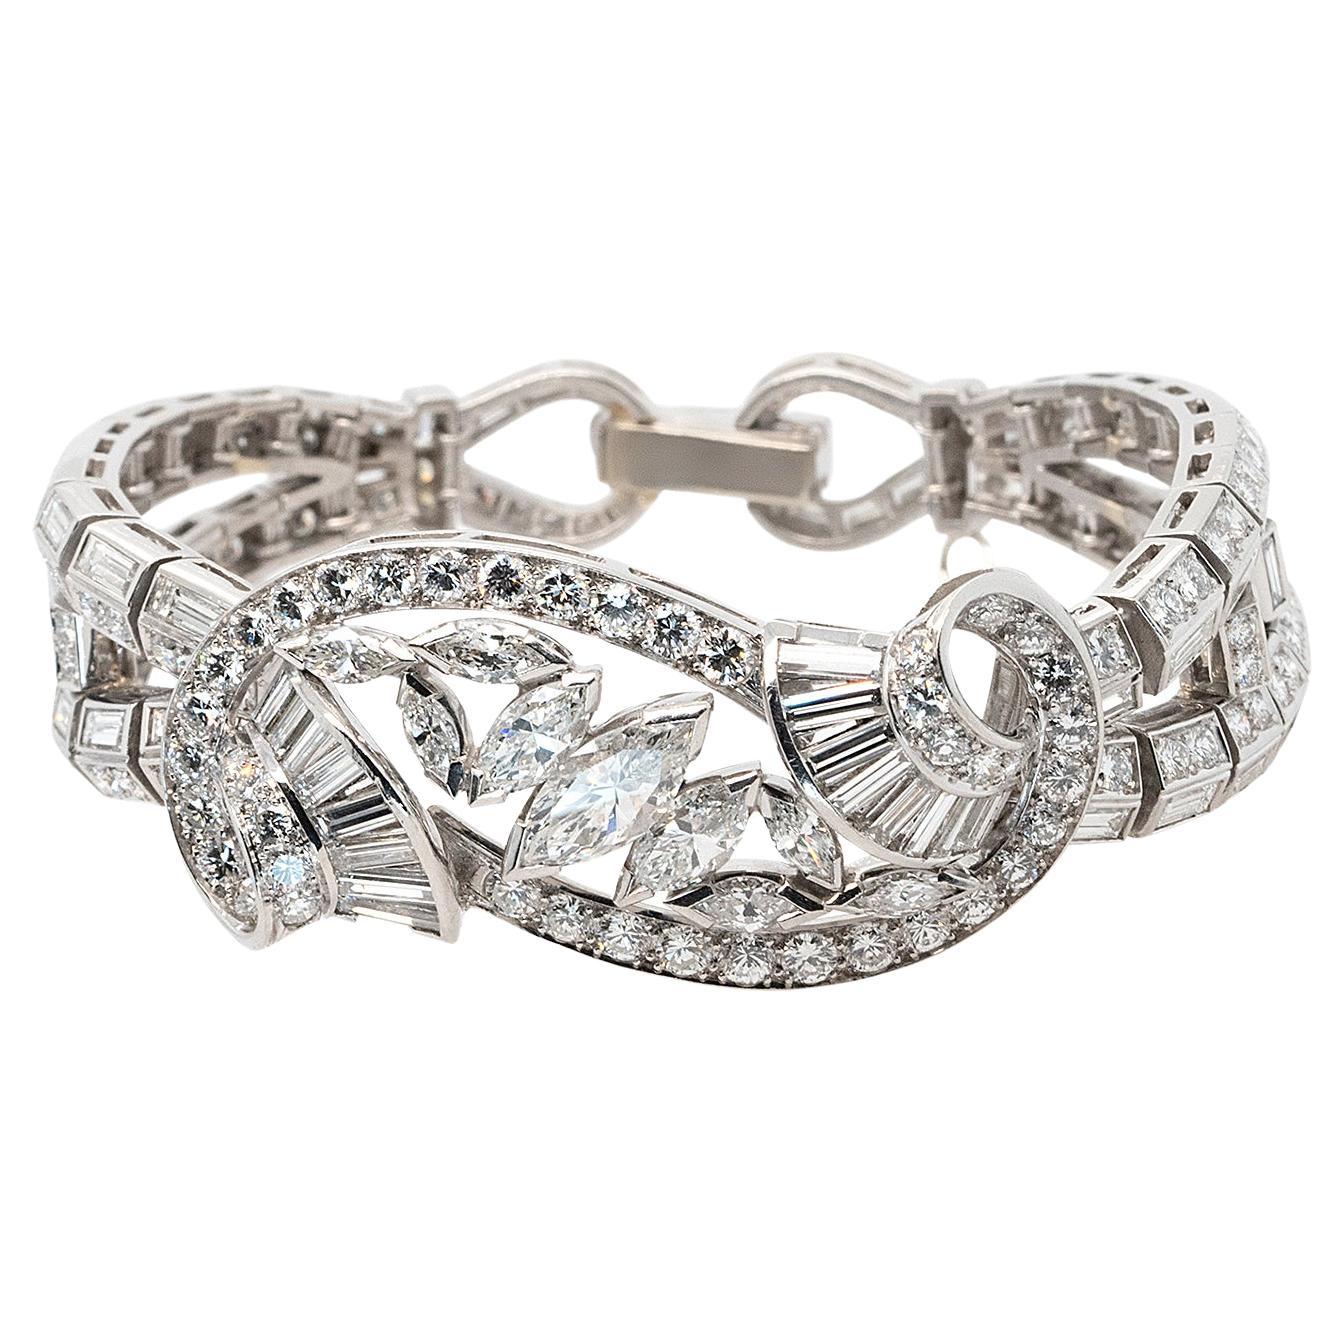 Platinum Bracelet With Natural Mixed Cut Diamonds And Center Marquise For Sale